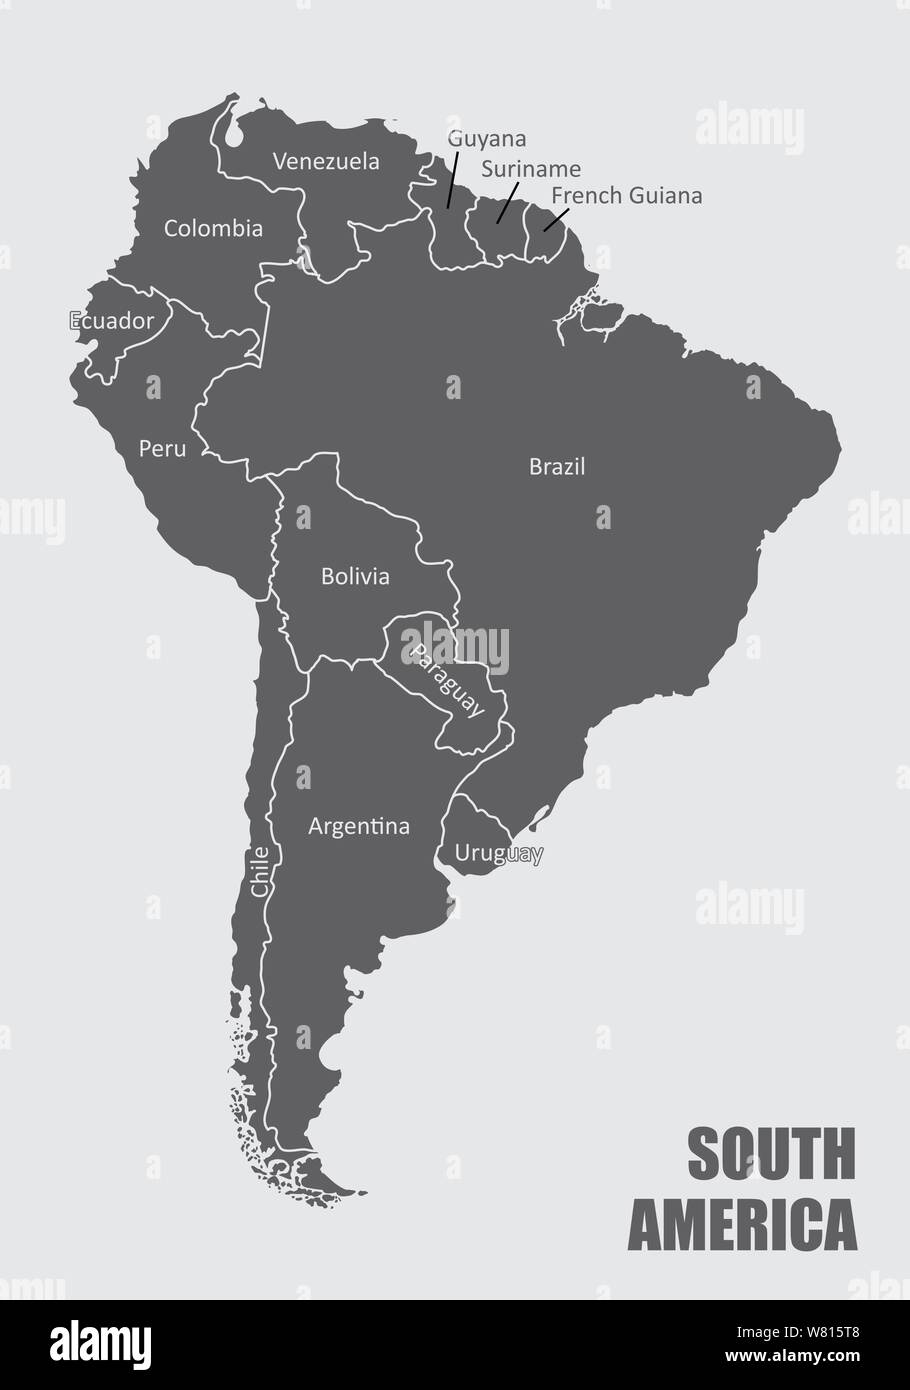 The South America map with countries borders and labels Stock Vector